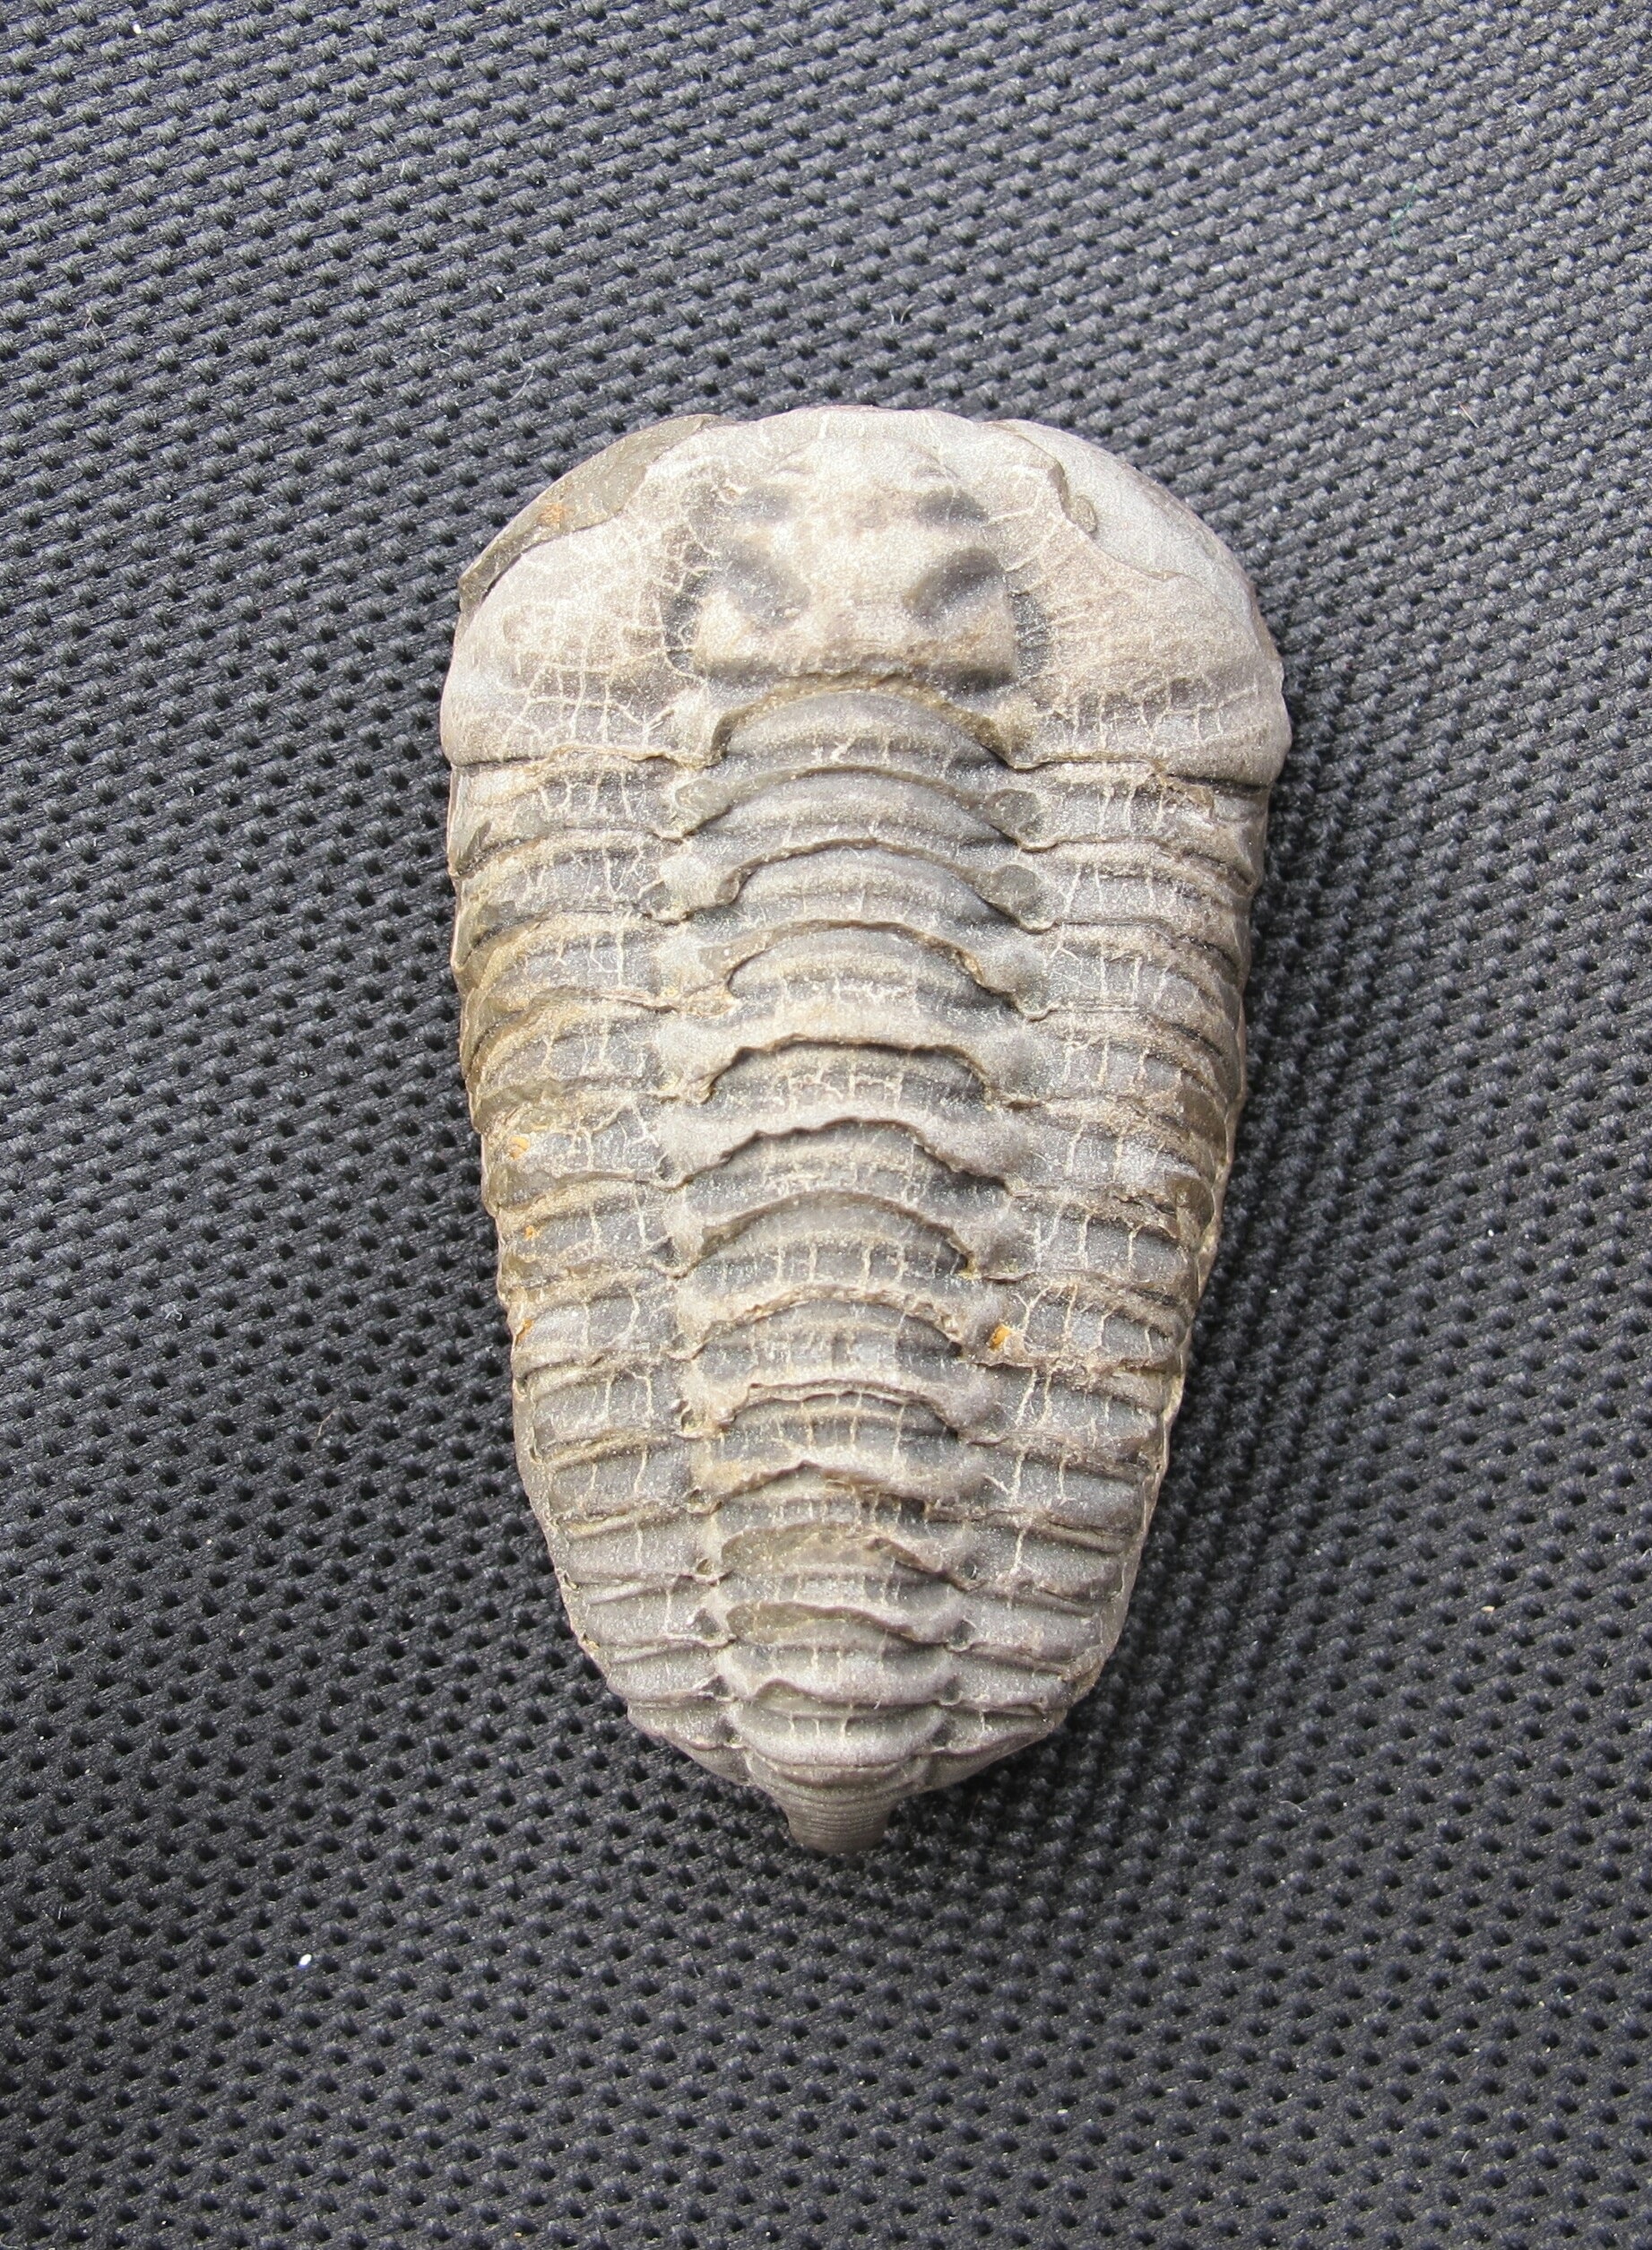 Colpocoryphe Bohemica, Fossil, Trilobite, animal shell, fossil